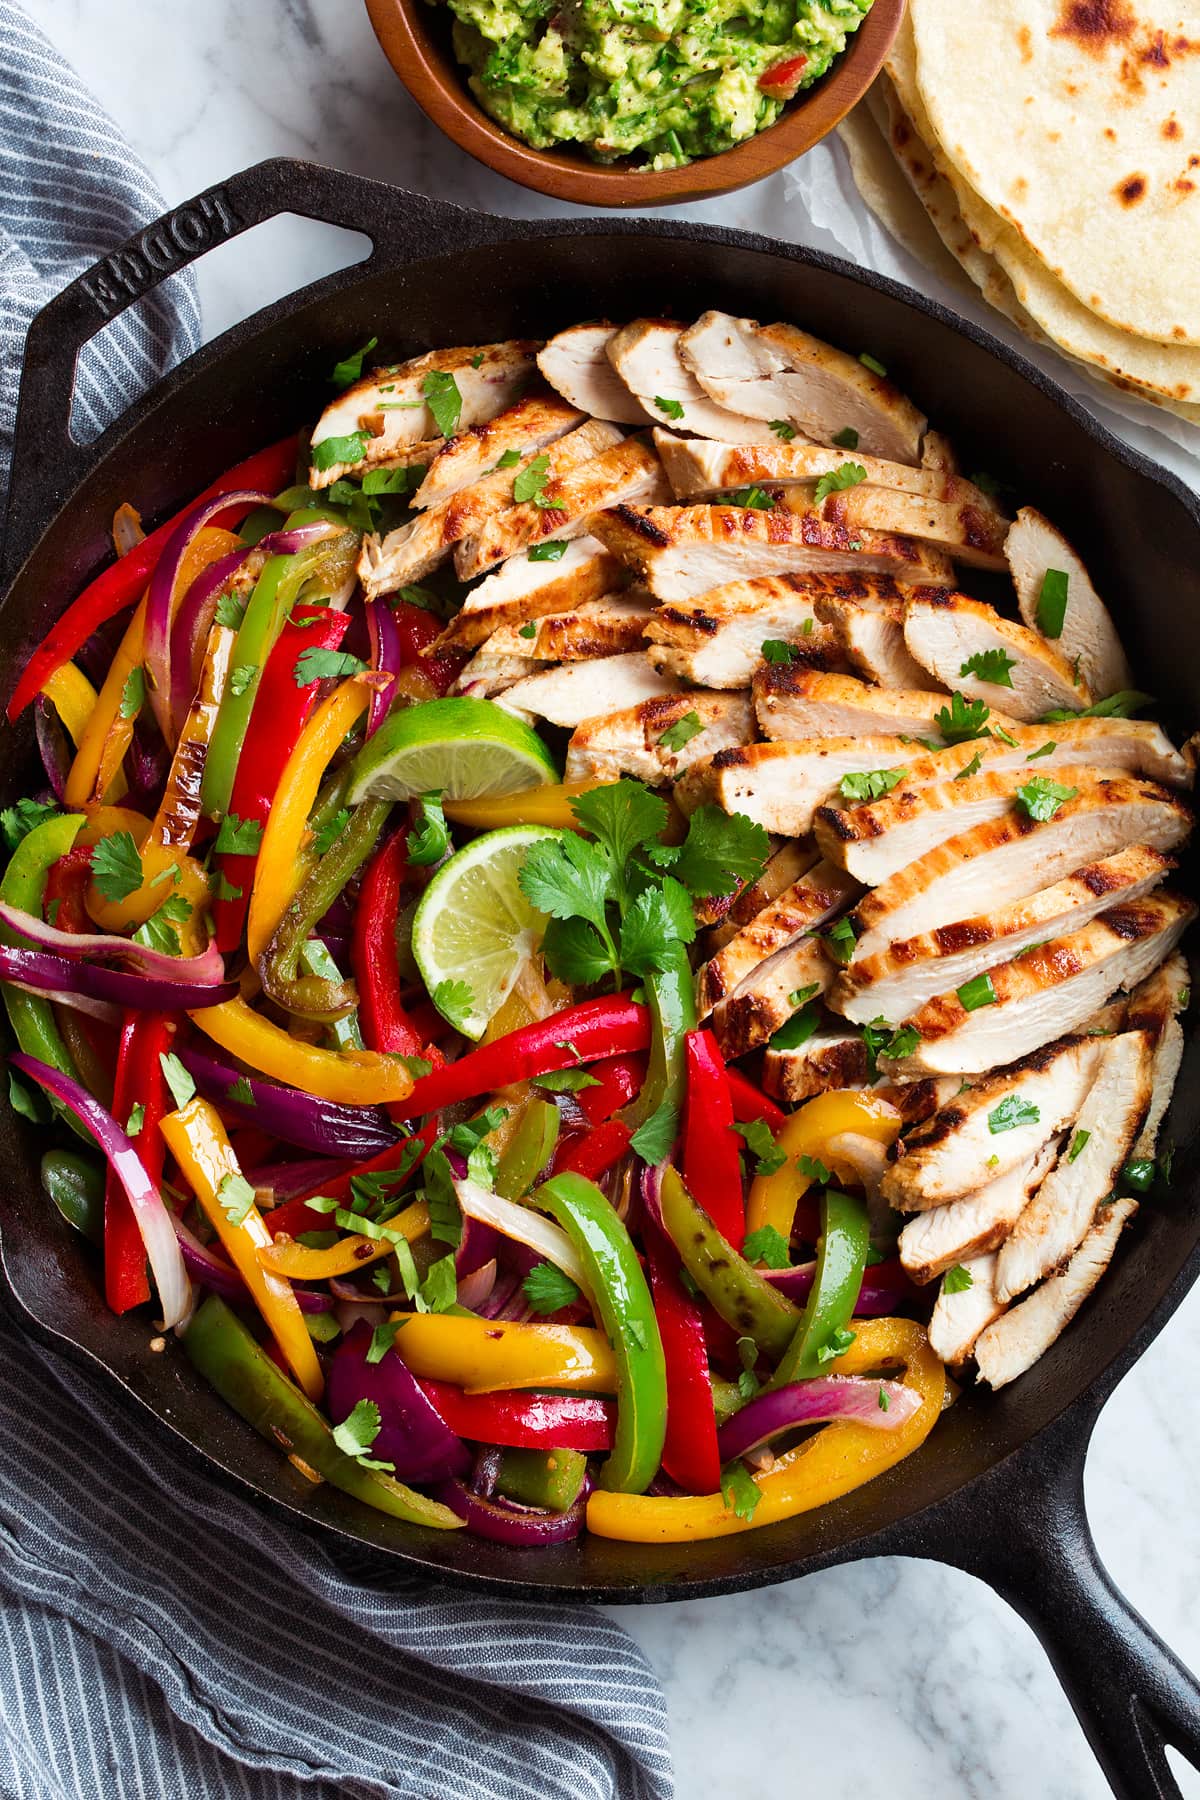 Chicken Fajitas Cooking Classy,Grilling Salmon With Skin